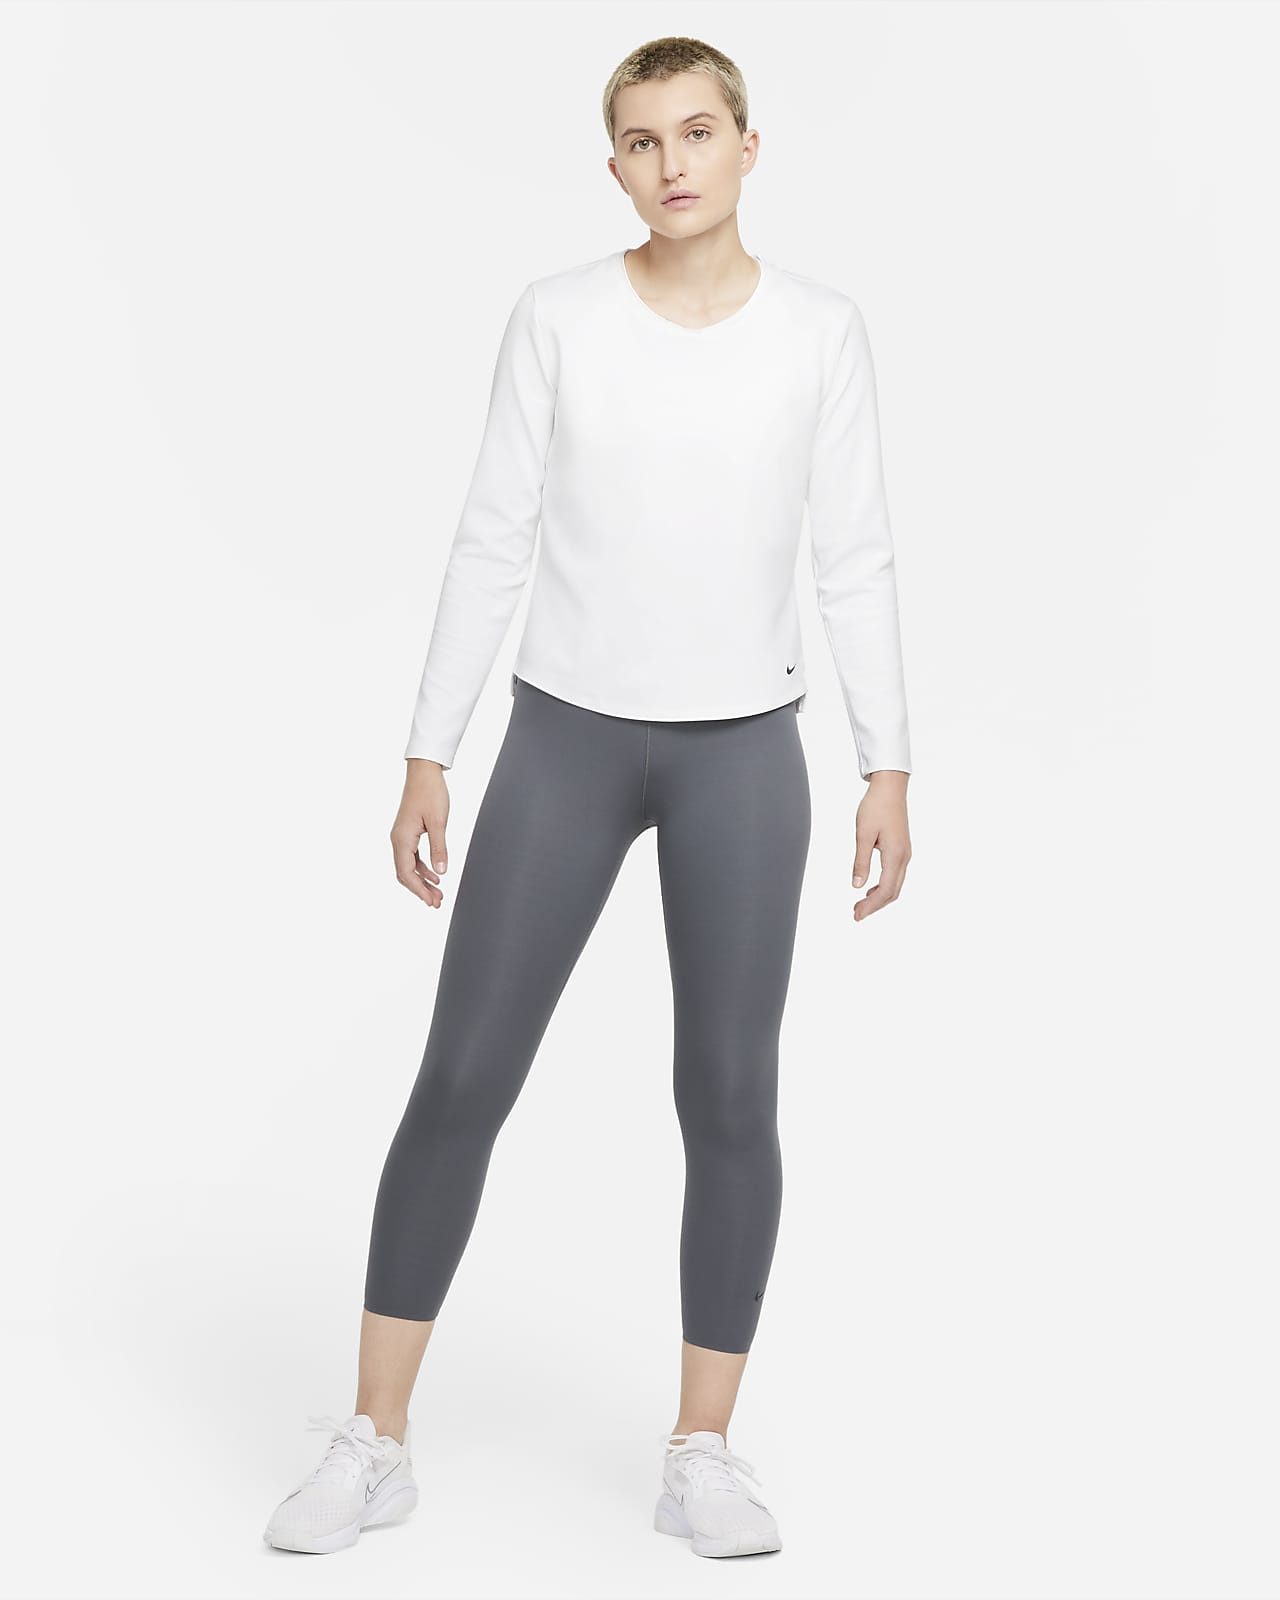 Women\'s Therma-FIT Long-Sleeve One Top. Nike